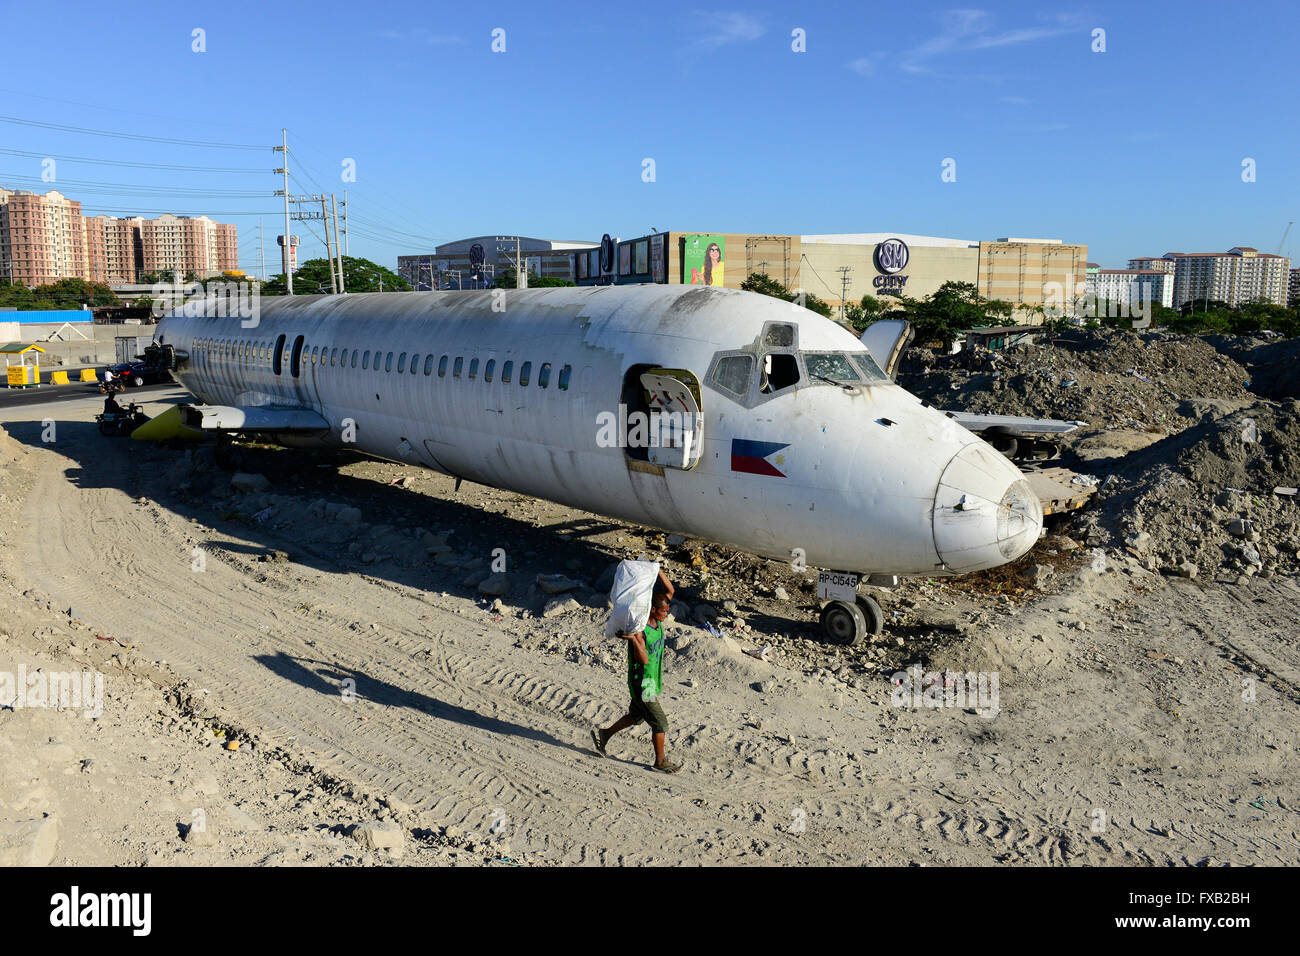 PHILIPPINES, Manila, Parañaque City, dumped airplane McDonnell Douglas DC-9 of philippine Airline Cebu Pacific, behind SM city shopping mall Sucat Stock Photo